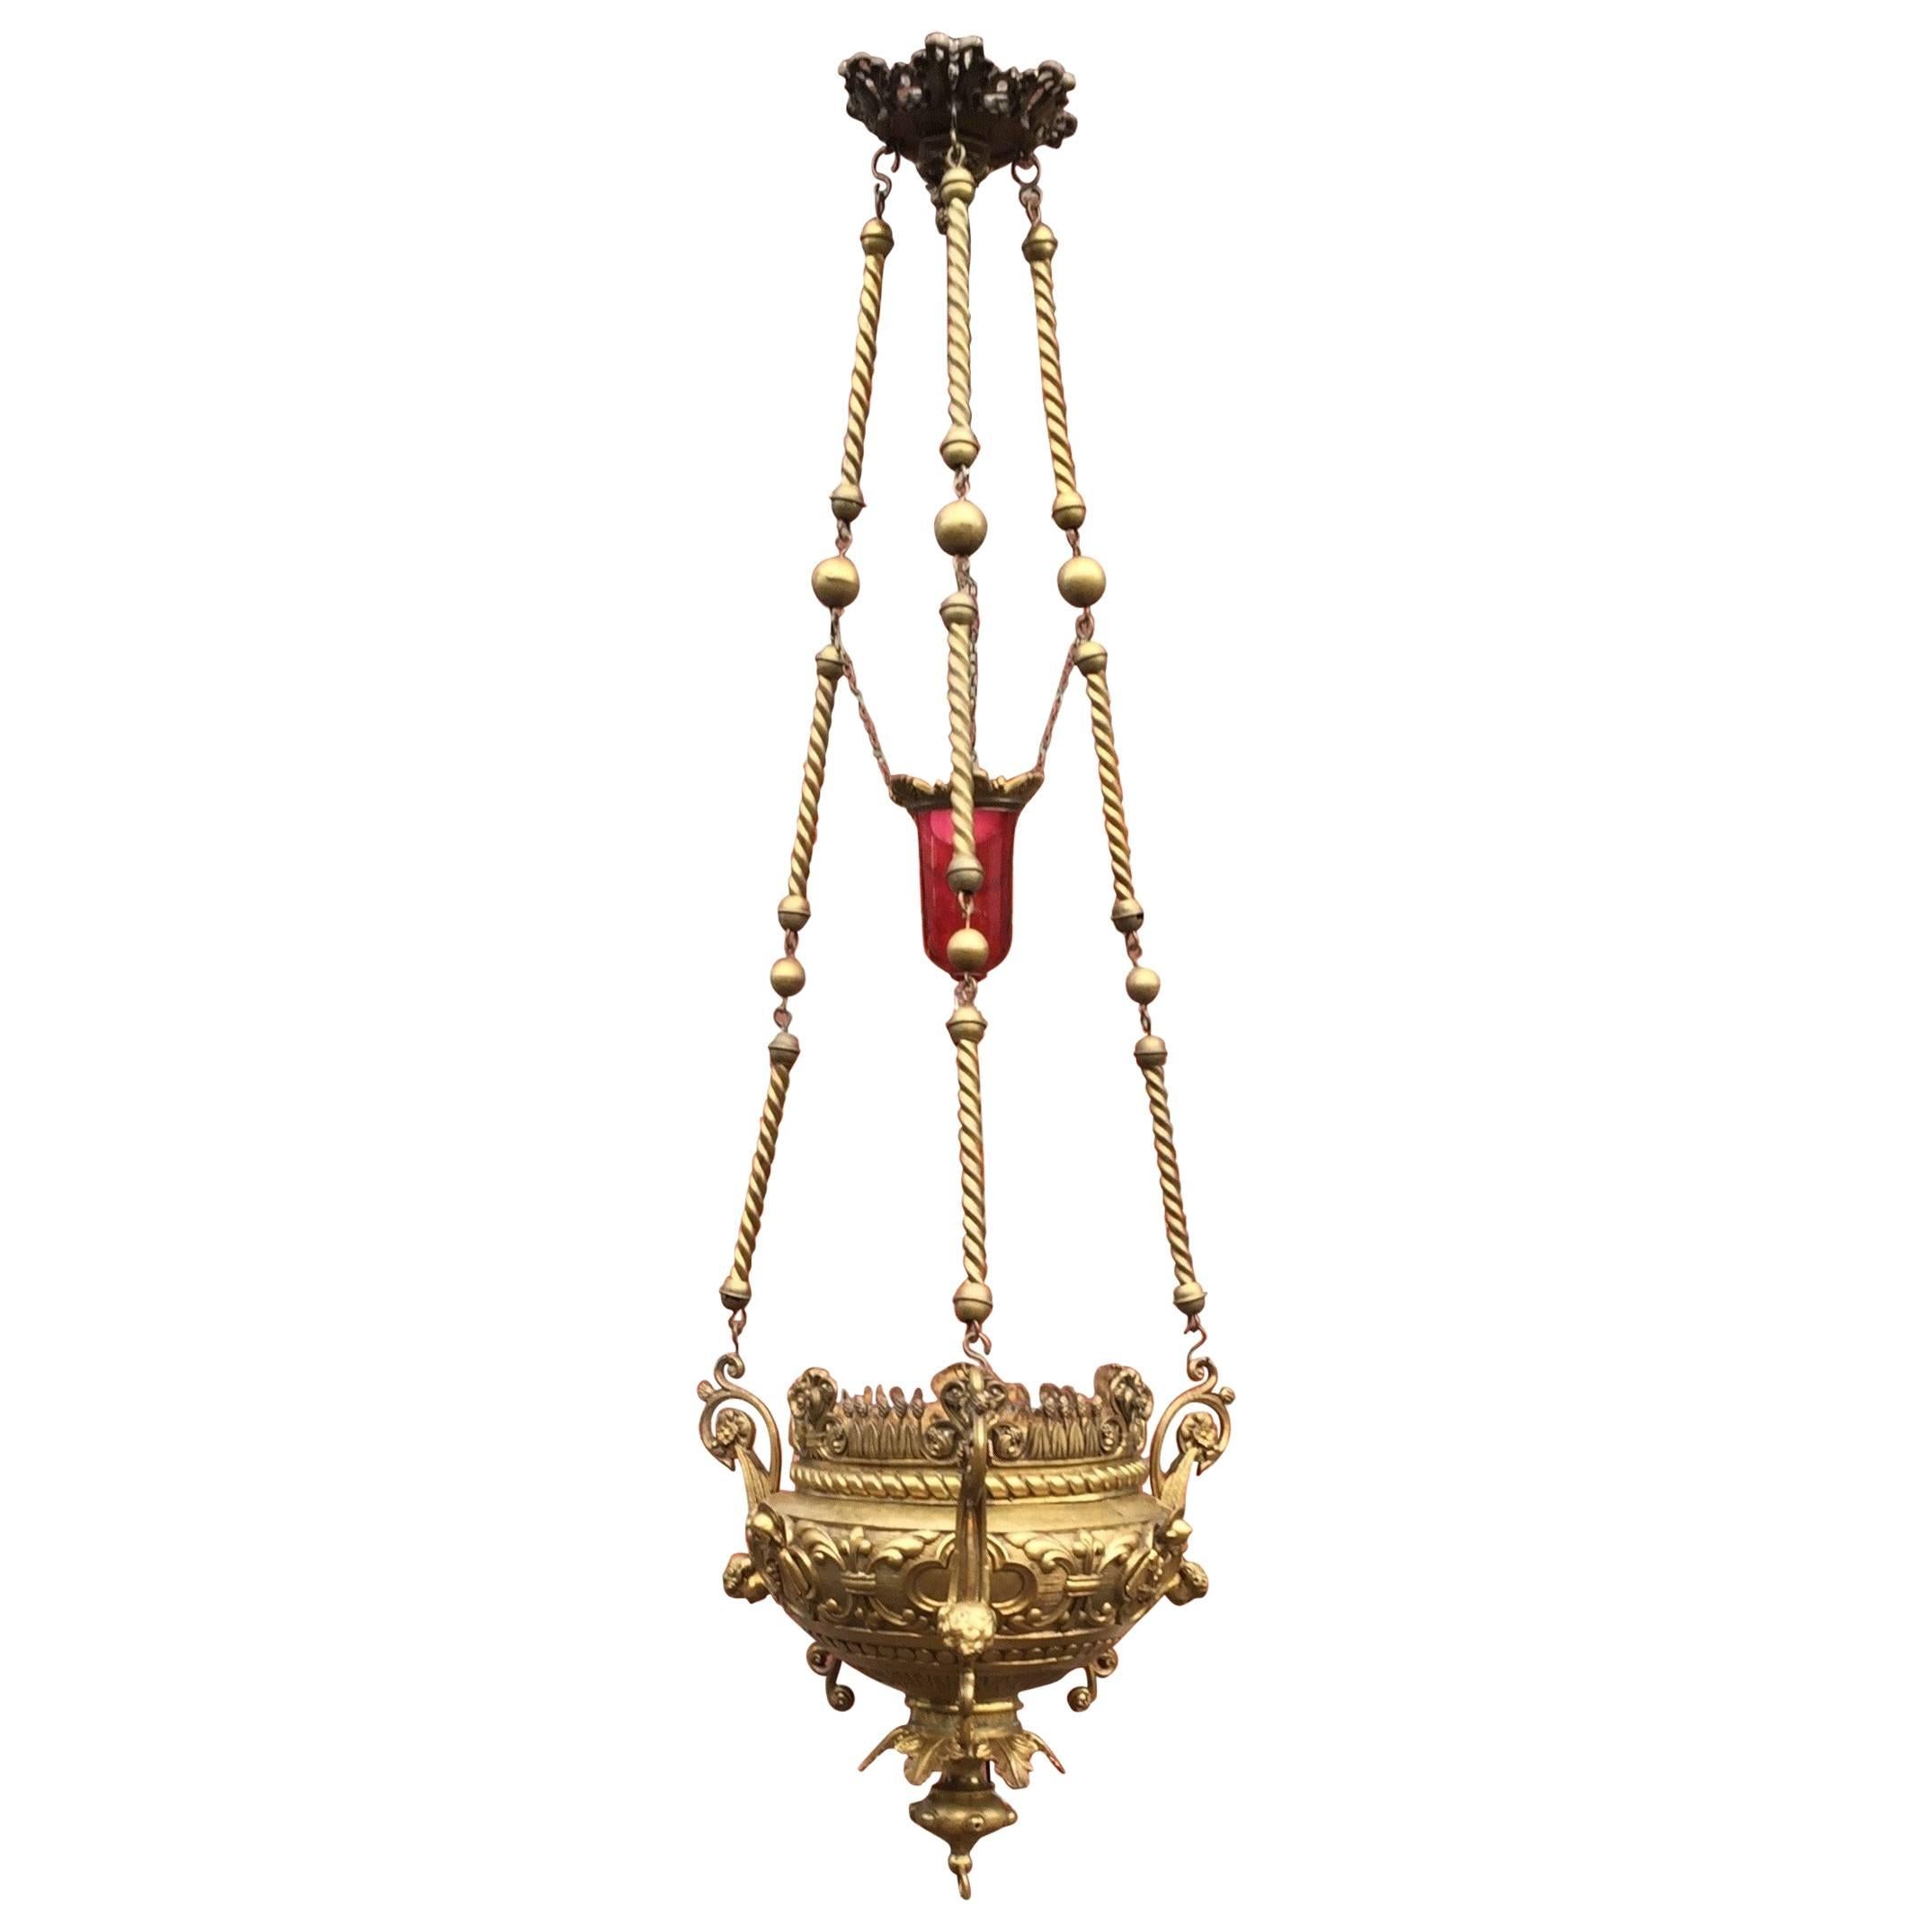 Gothic Revival Heavy Bronze Sanctuary Lamp / Pendant with Glass Candle Holder